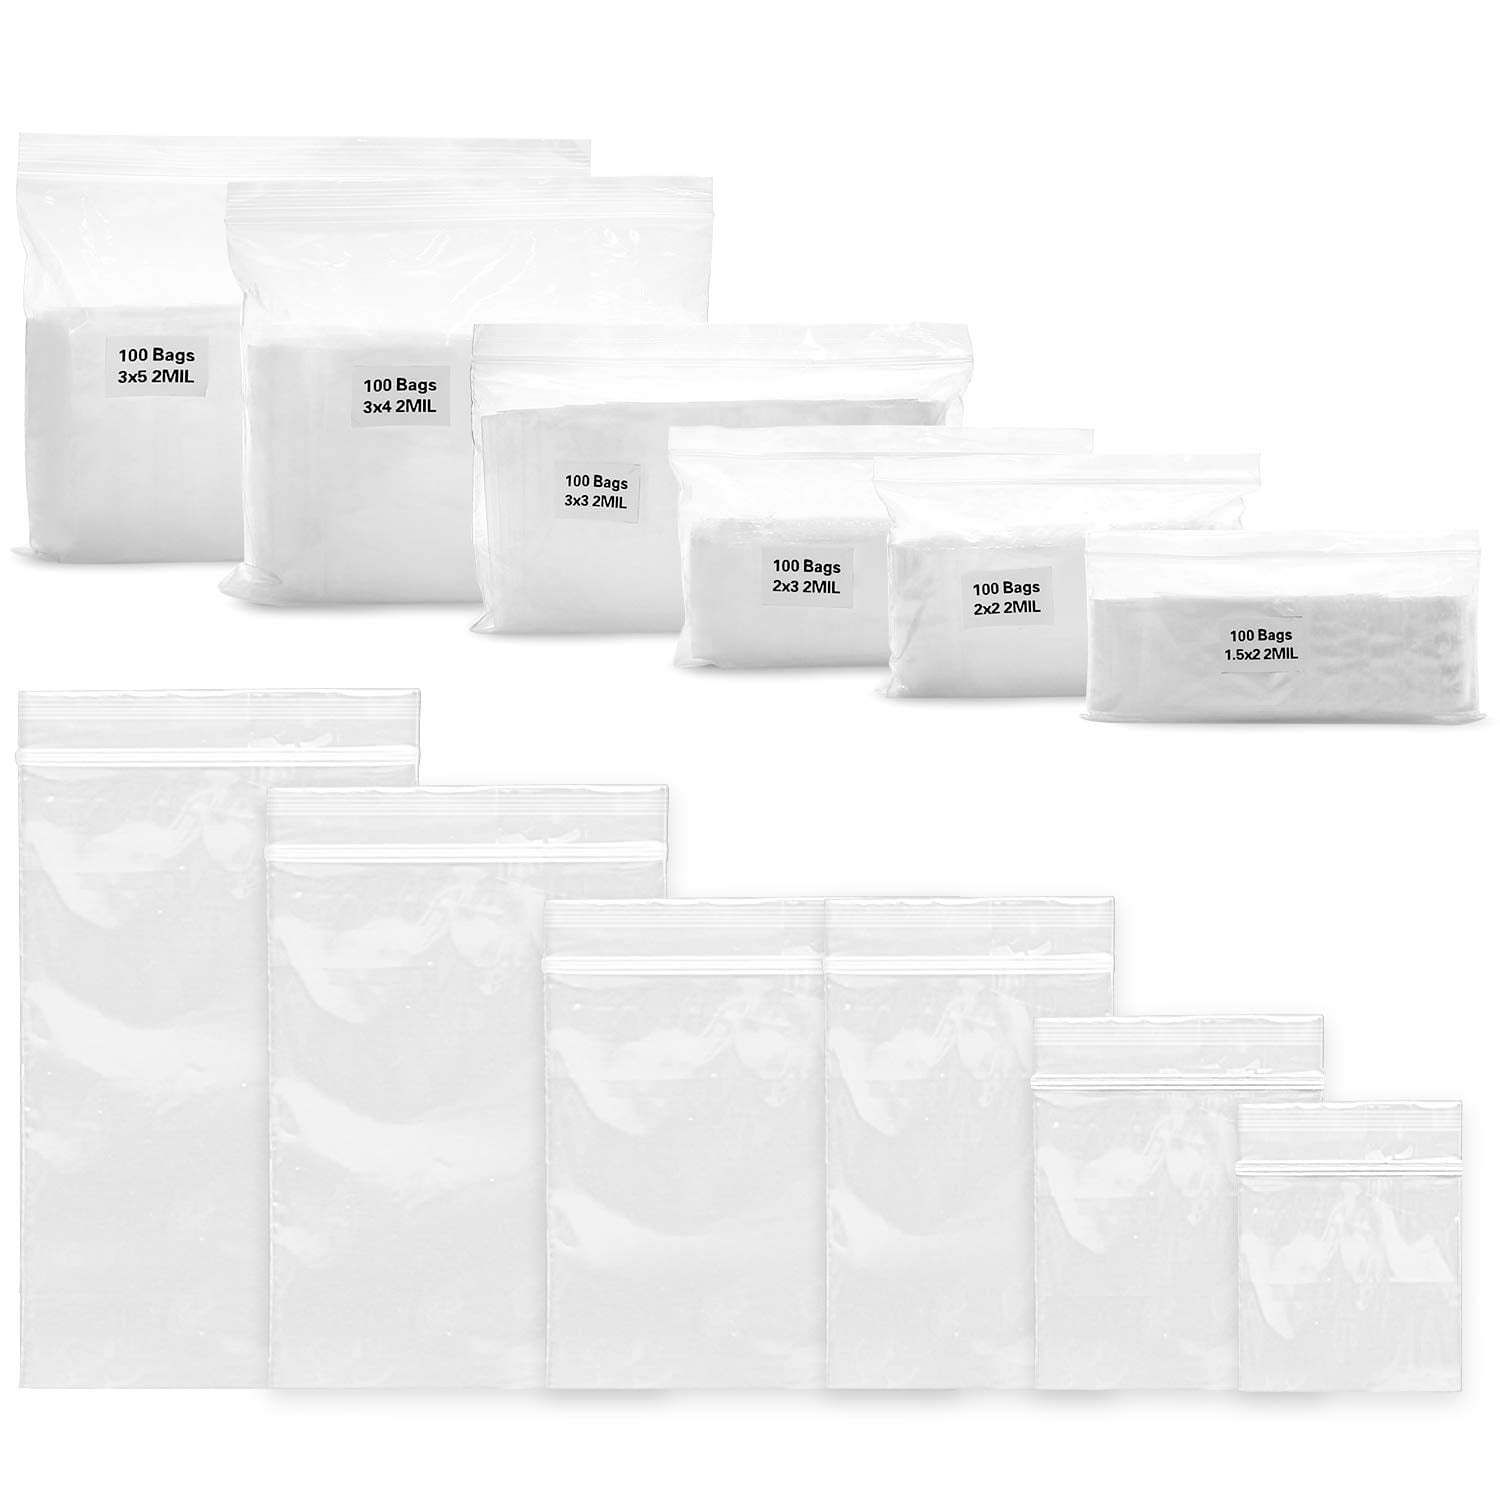 Reclosable Self Sealing Amiff Zip Lock Bags 3x5 Self Lock Plastic Bags 3 x 5 Resealable Clear Poly Bags 2 mil Thick Reusable Pack of 100 Storage Bags with Zipper.